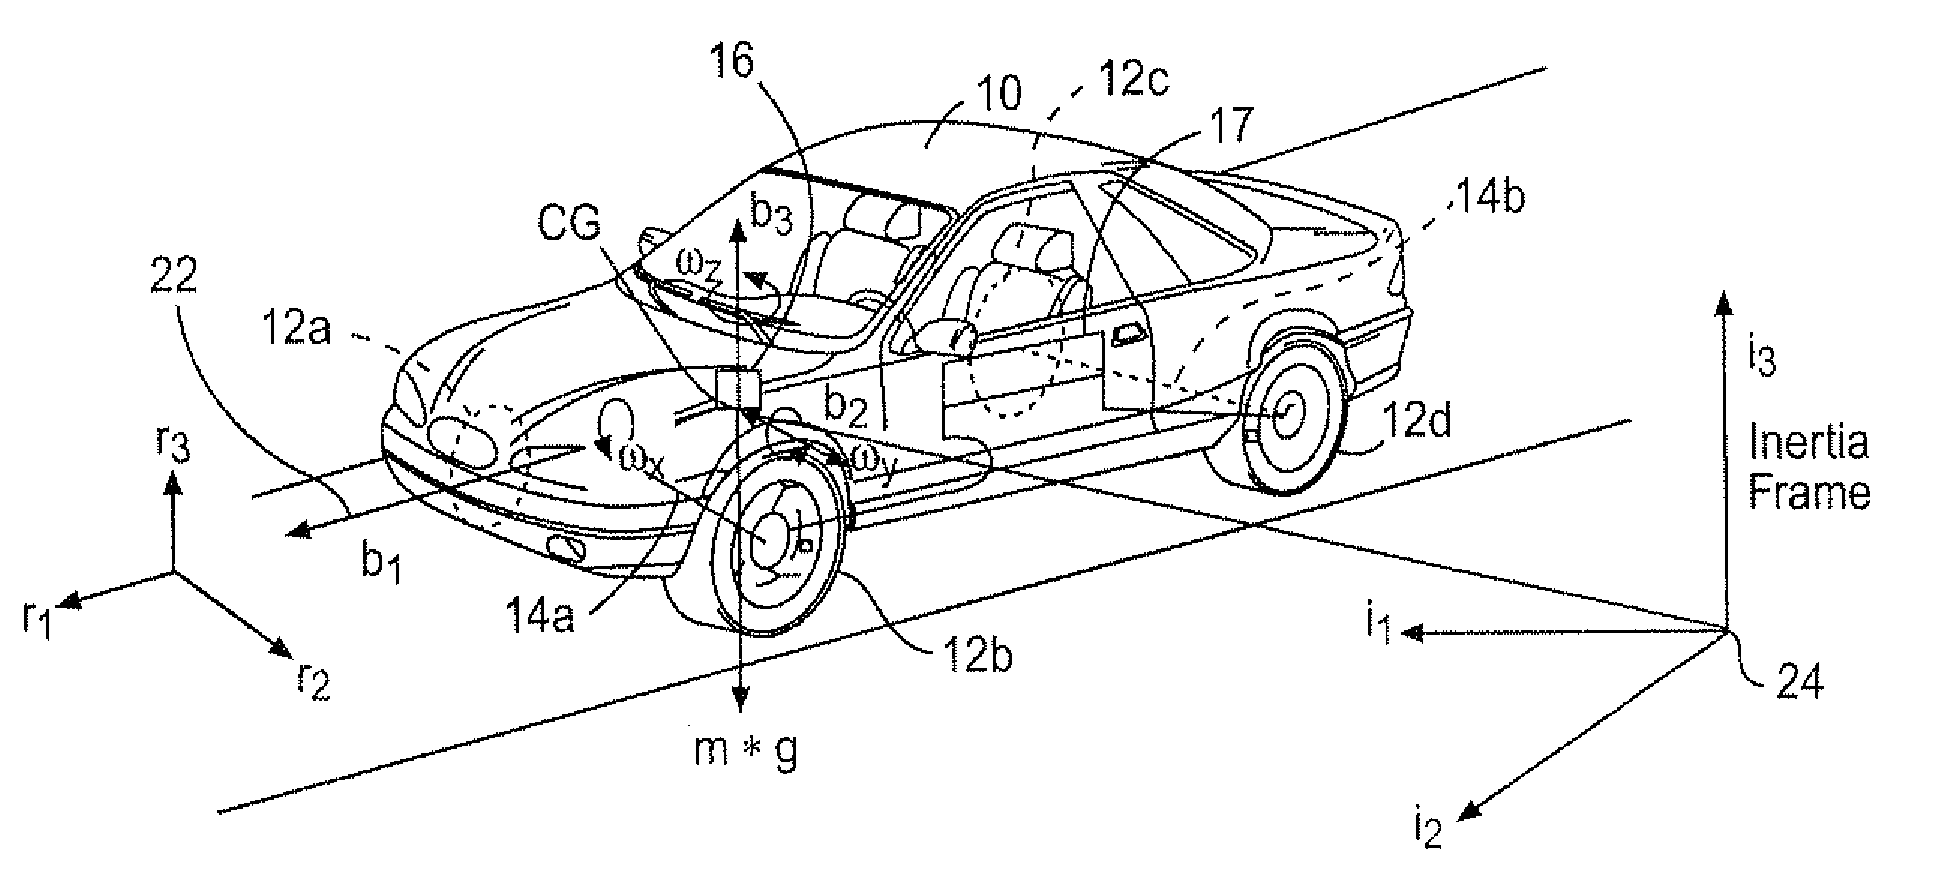 Vehicle stability control system with tire monitoring